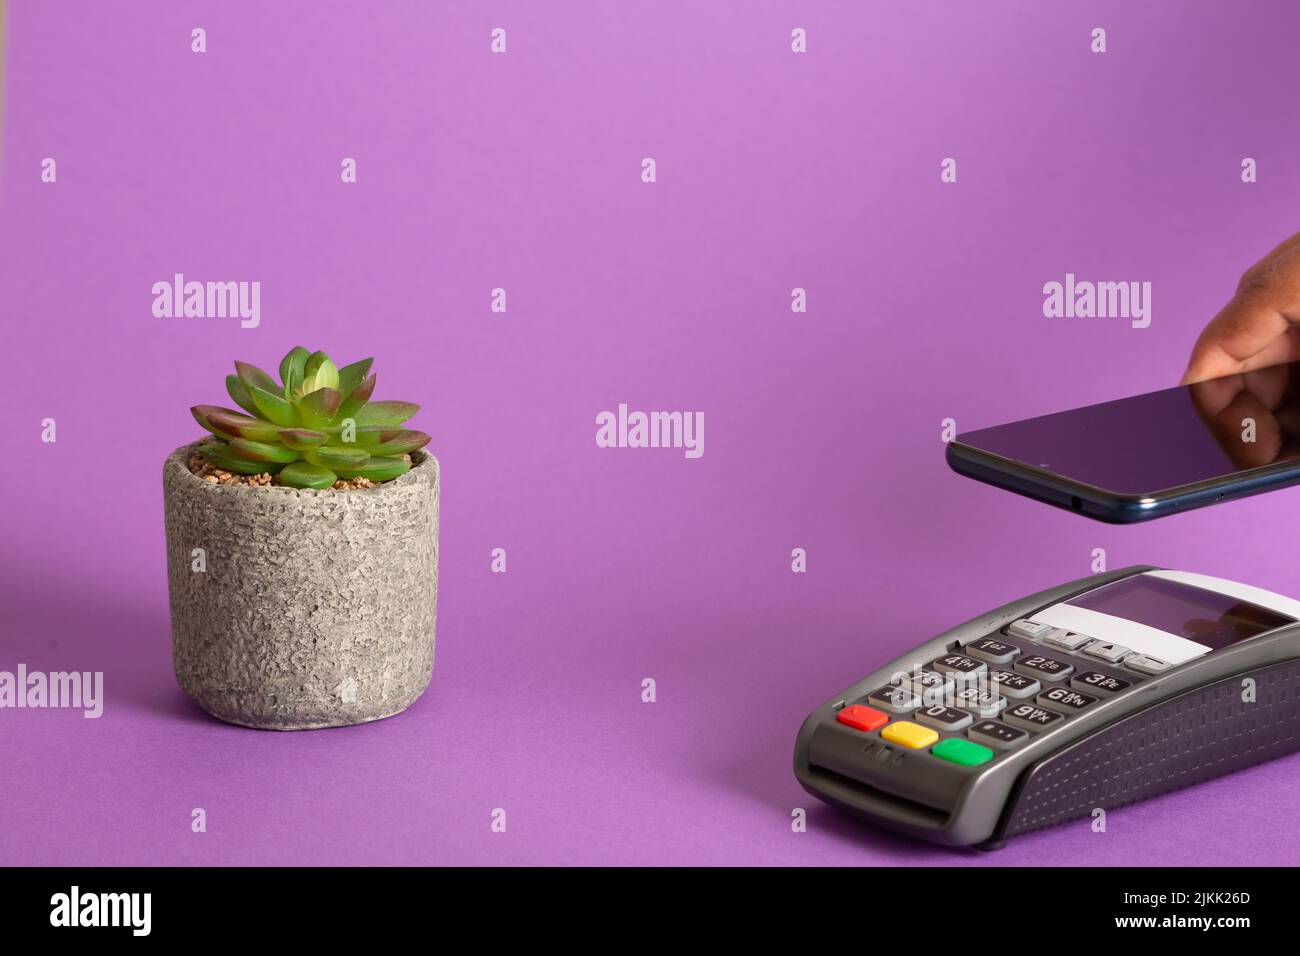 A closeup shot of the POS terminal credit card machine and plant on a pink background Stock Photo